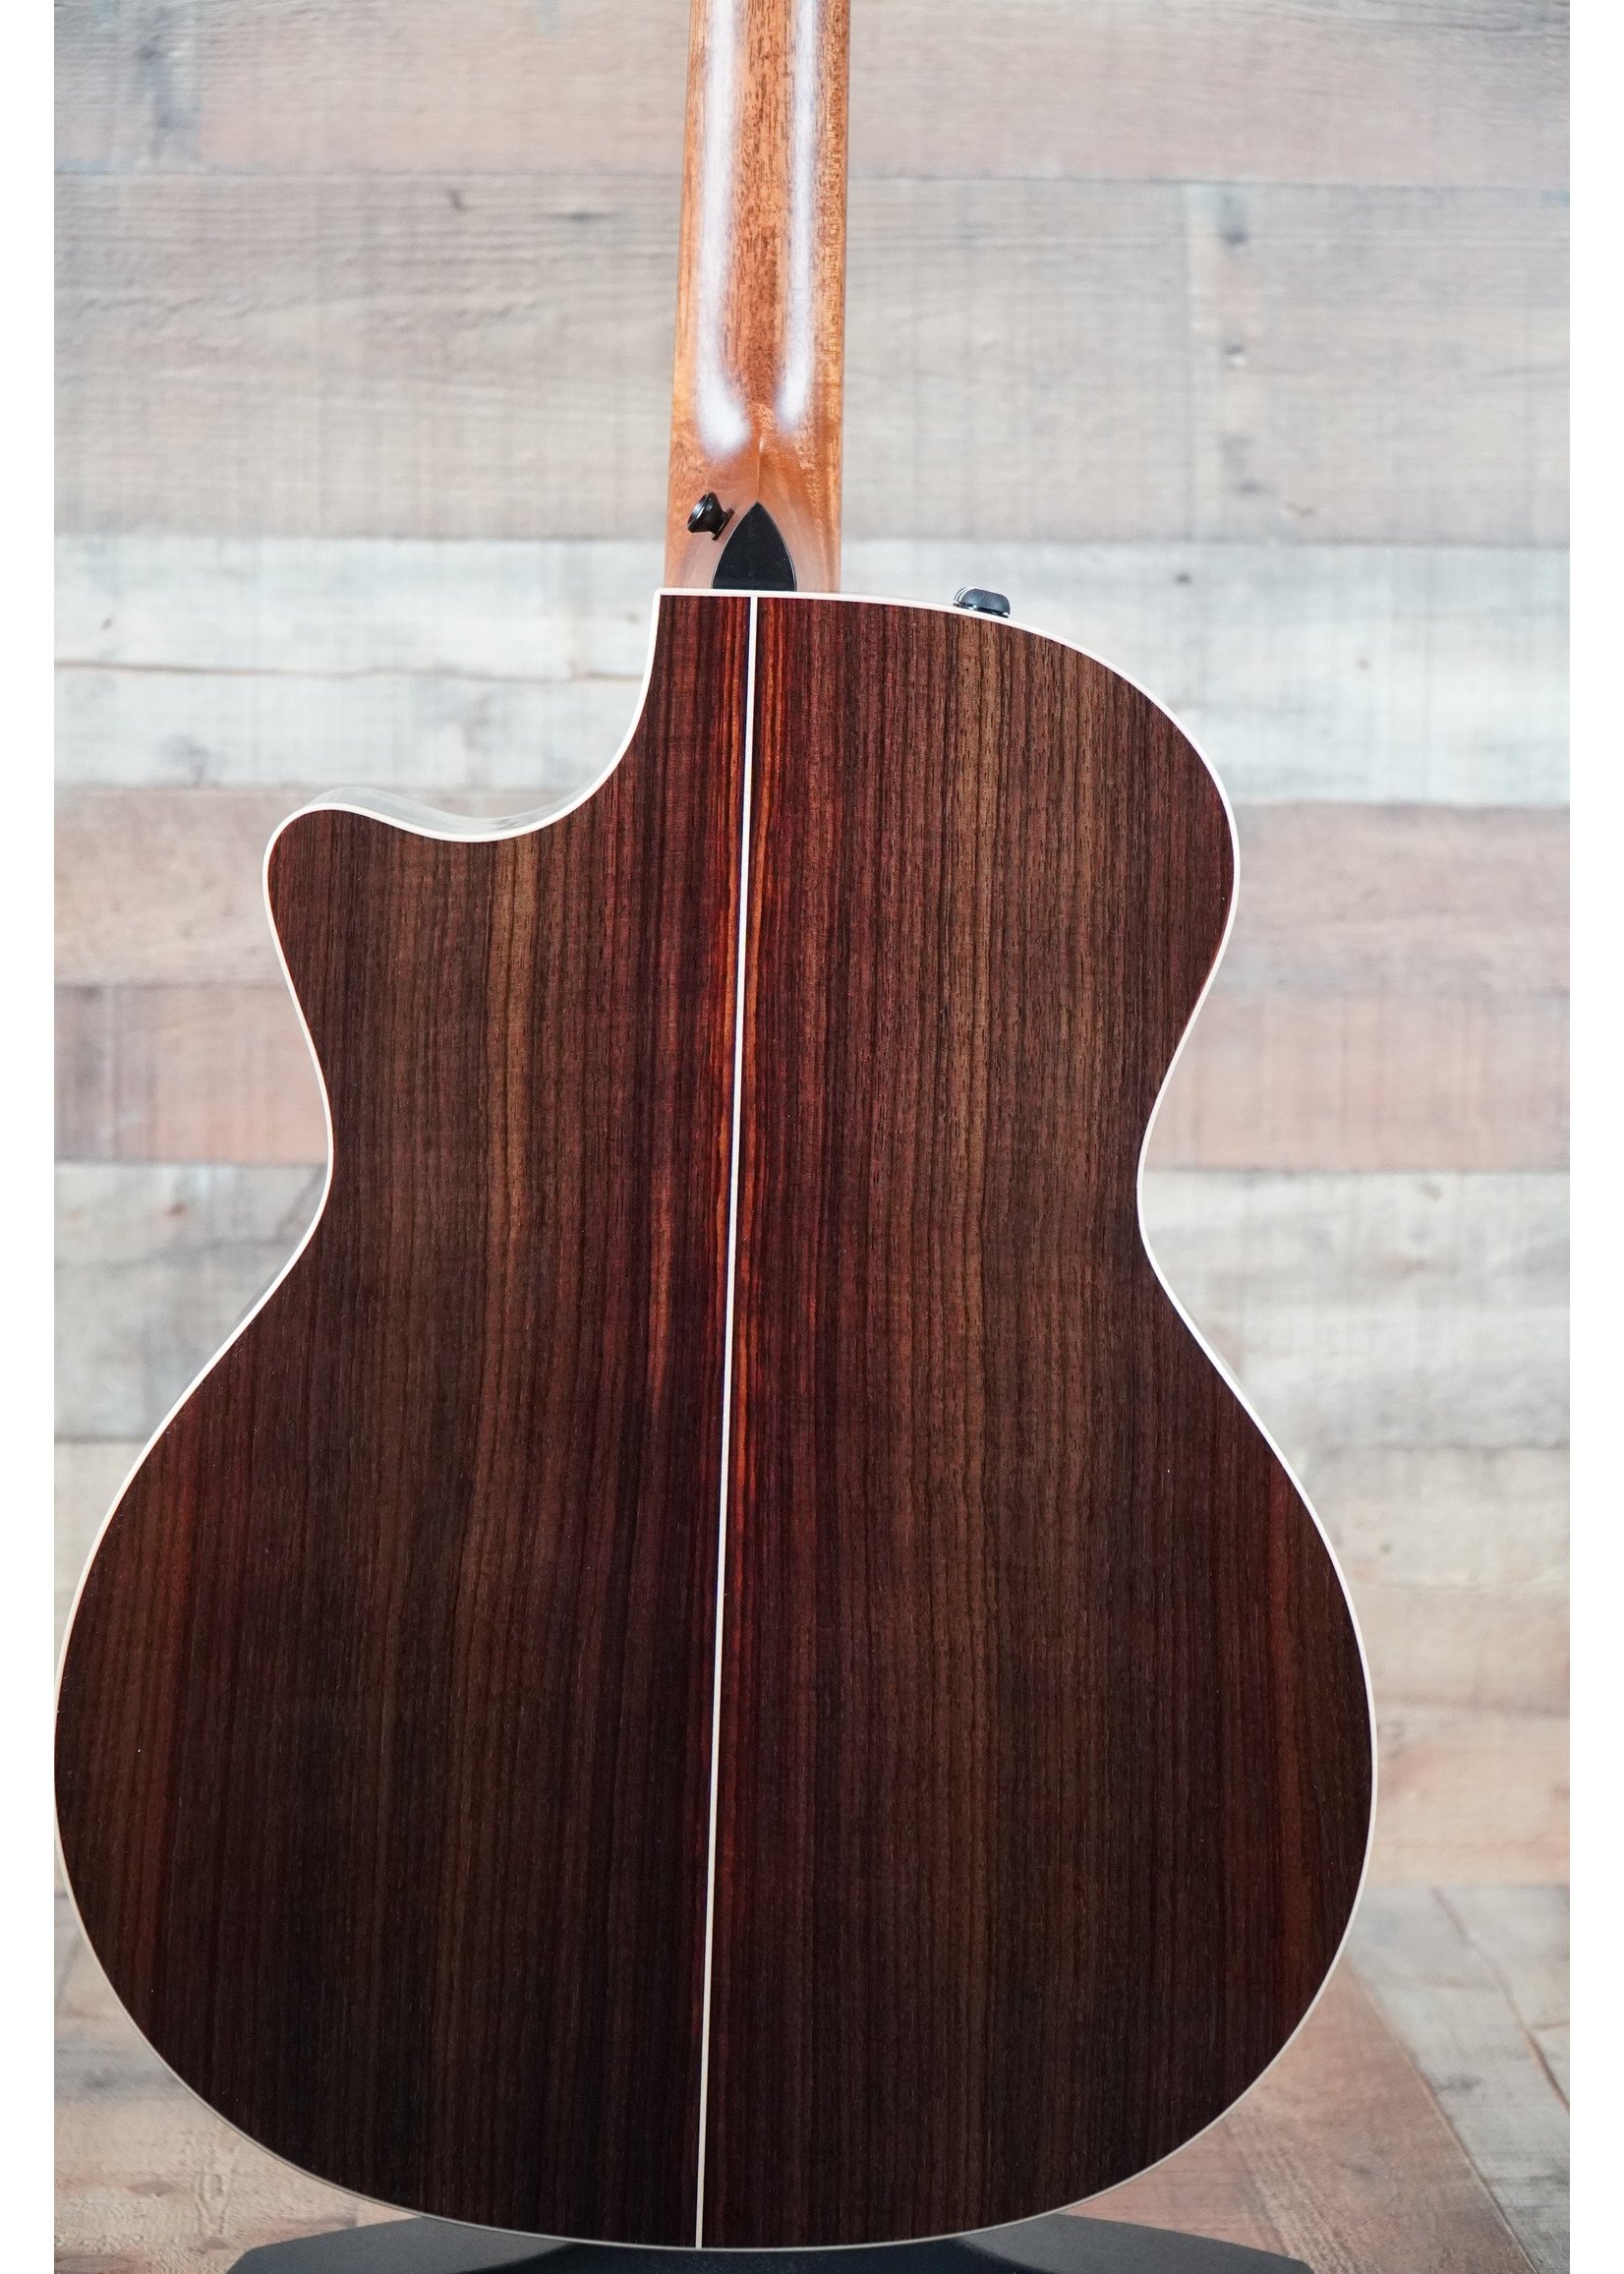 Taylor Taylor 814ce-SB Specialty | Sitka Spruce Top | Indian Rosewood Back and Sides | Tropical Mahogany Neck | Ebony Fretboard | Expression System® 2 Electronics | Venetian Cutaway | Taylor Deluxe Hardshell Brown Case